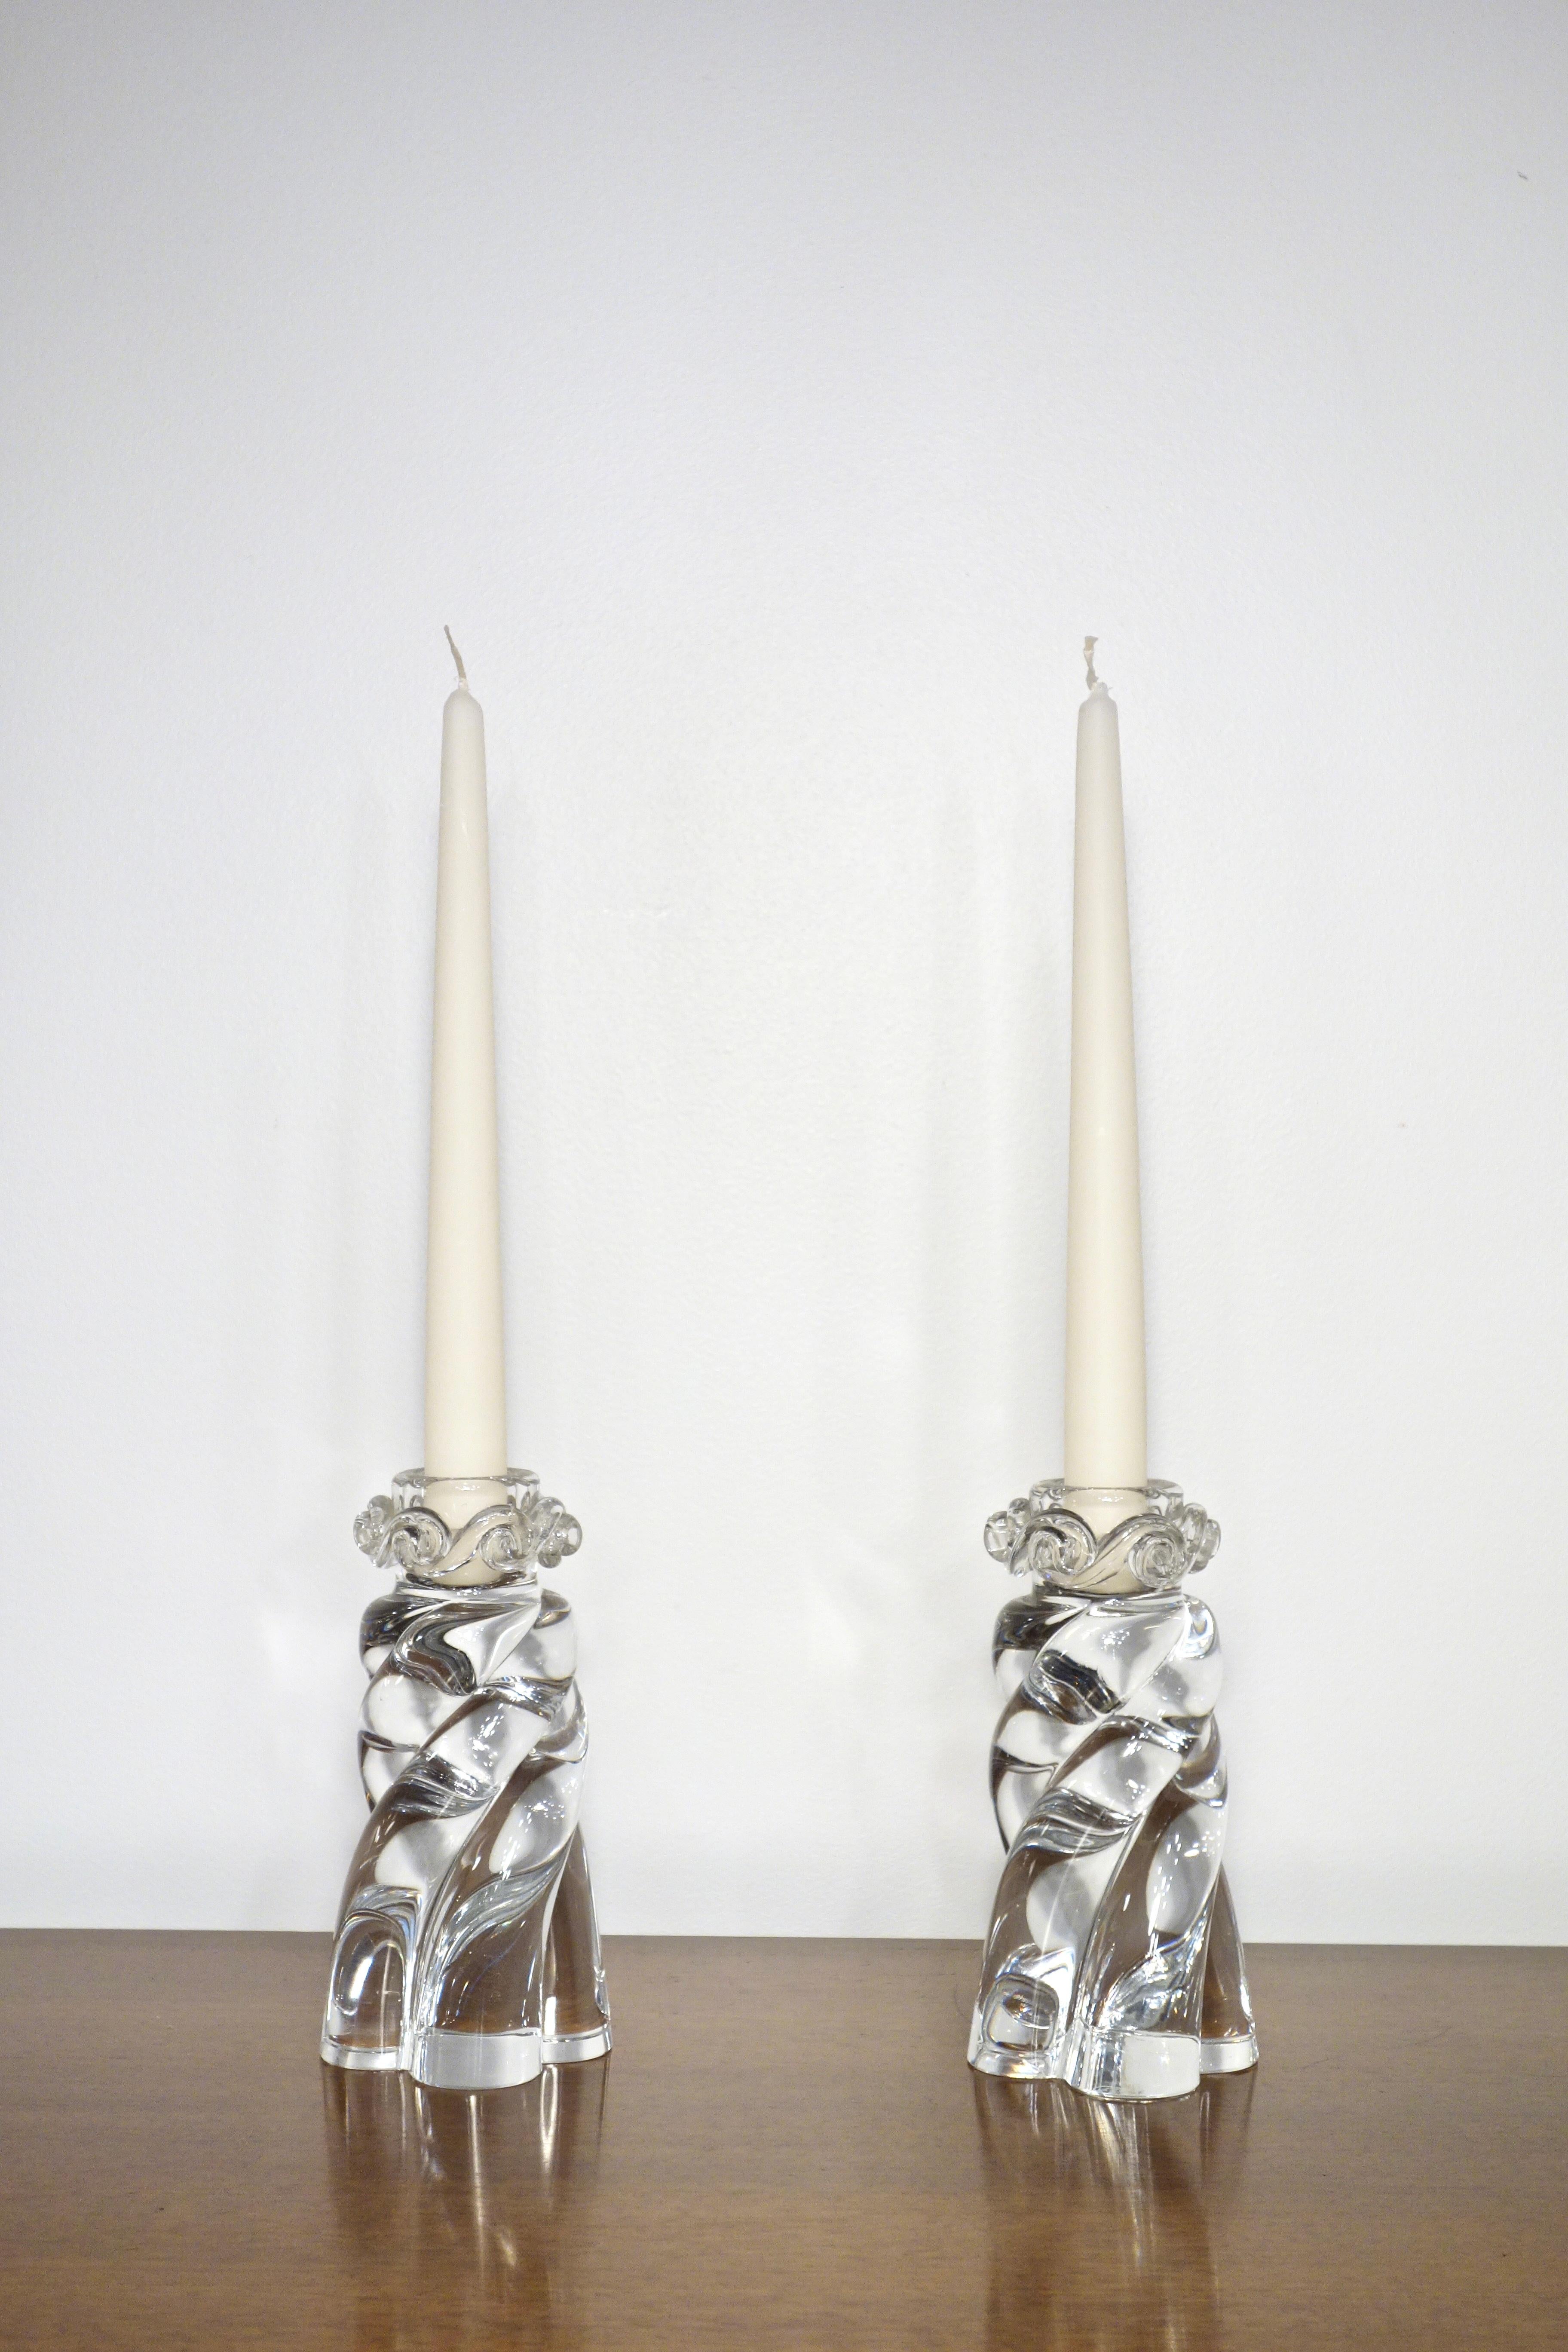 Pair of vintage crystal candlesticks signed by the famous house Baccarat. French manufacturing from the 1960s “Aladdin” model with twisted decoration. Sold pair with their candles. Very good condition, these candlesticks will bring an elegant and